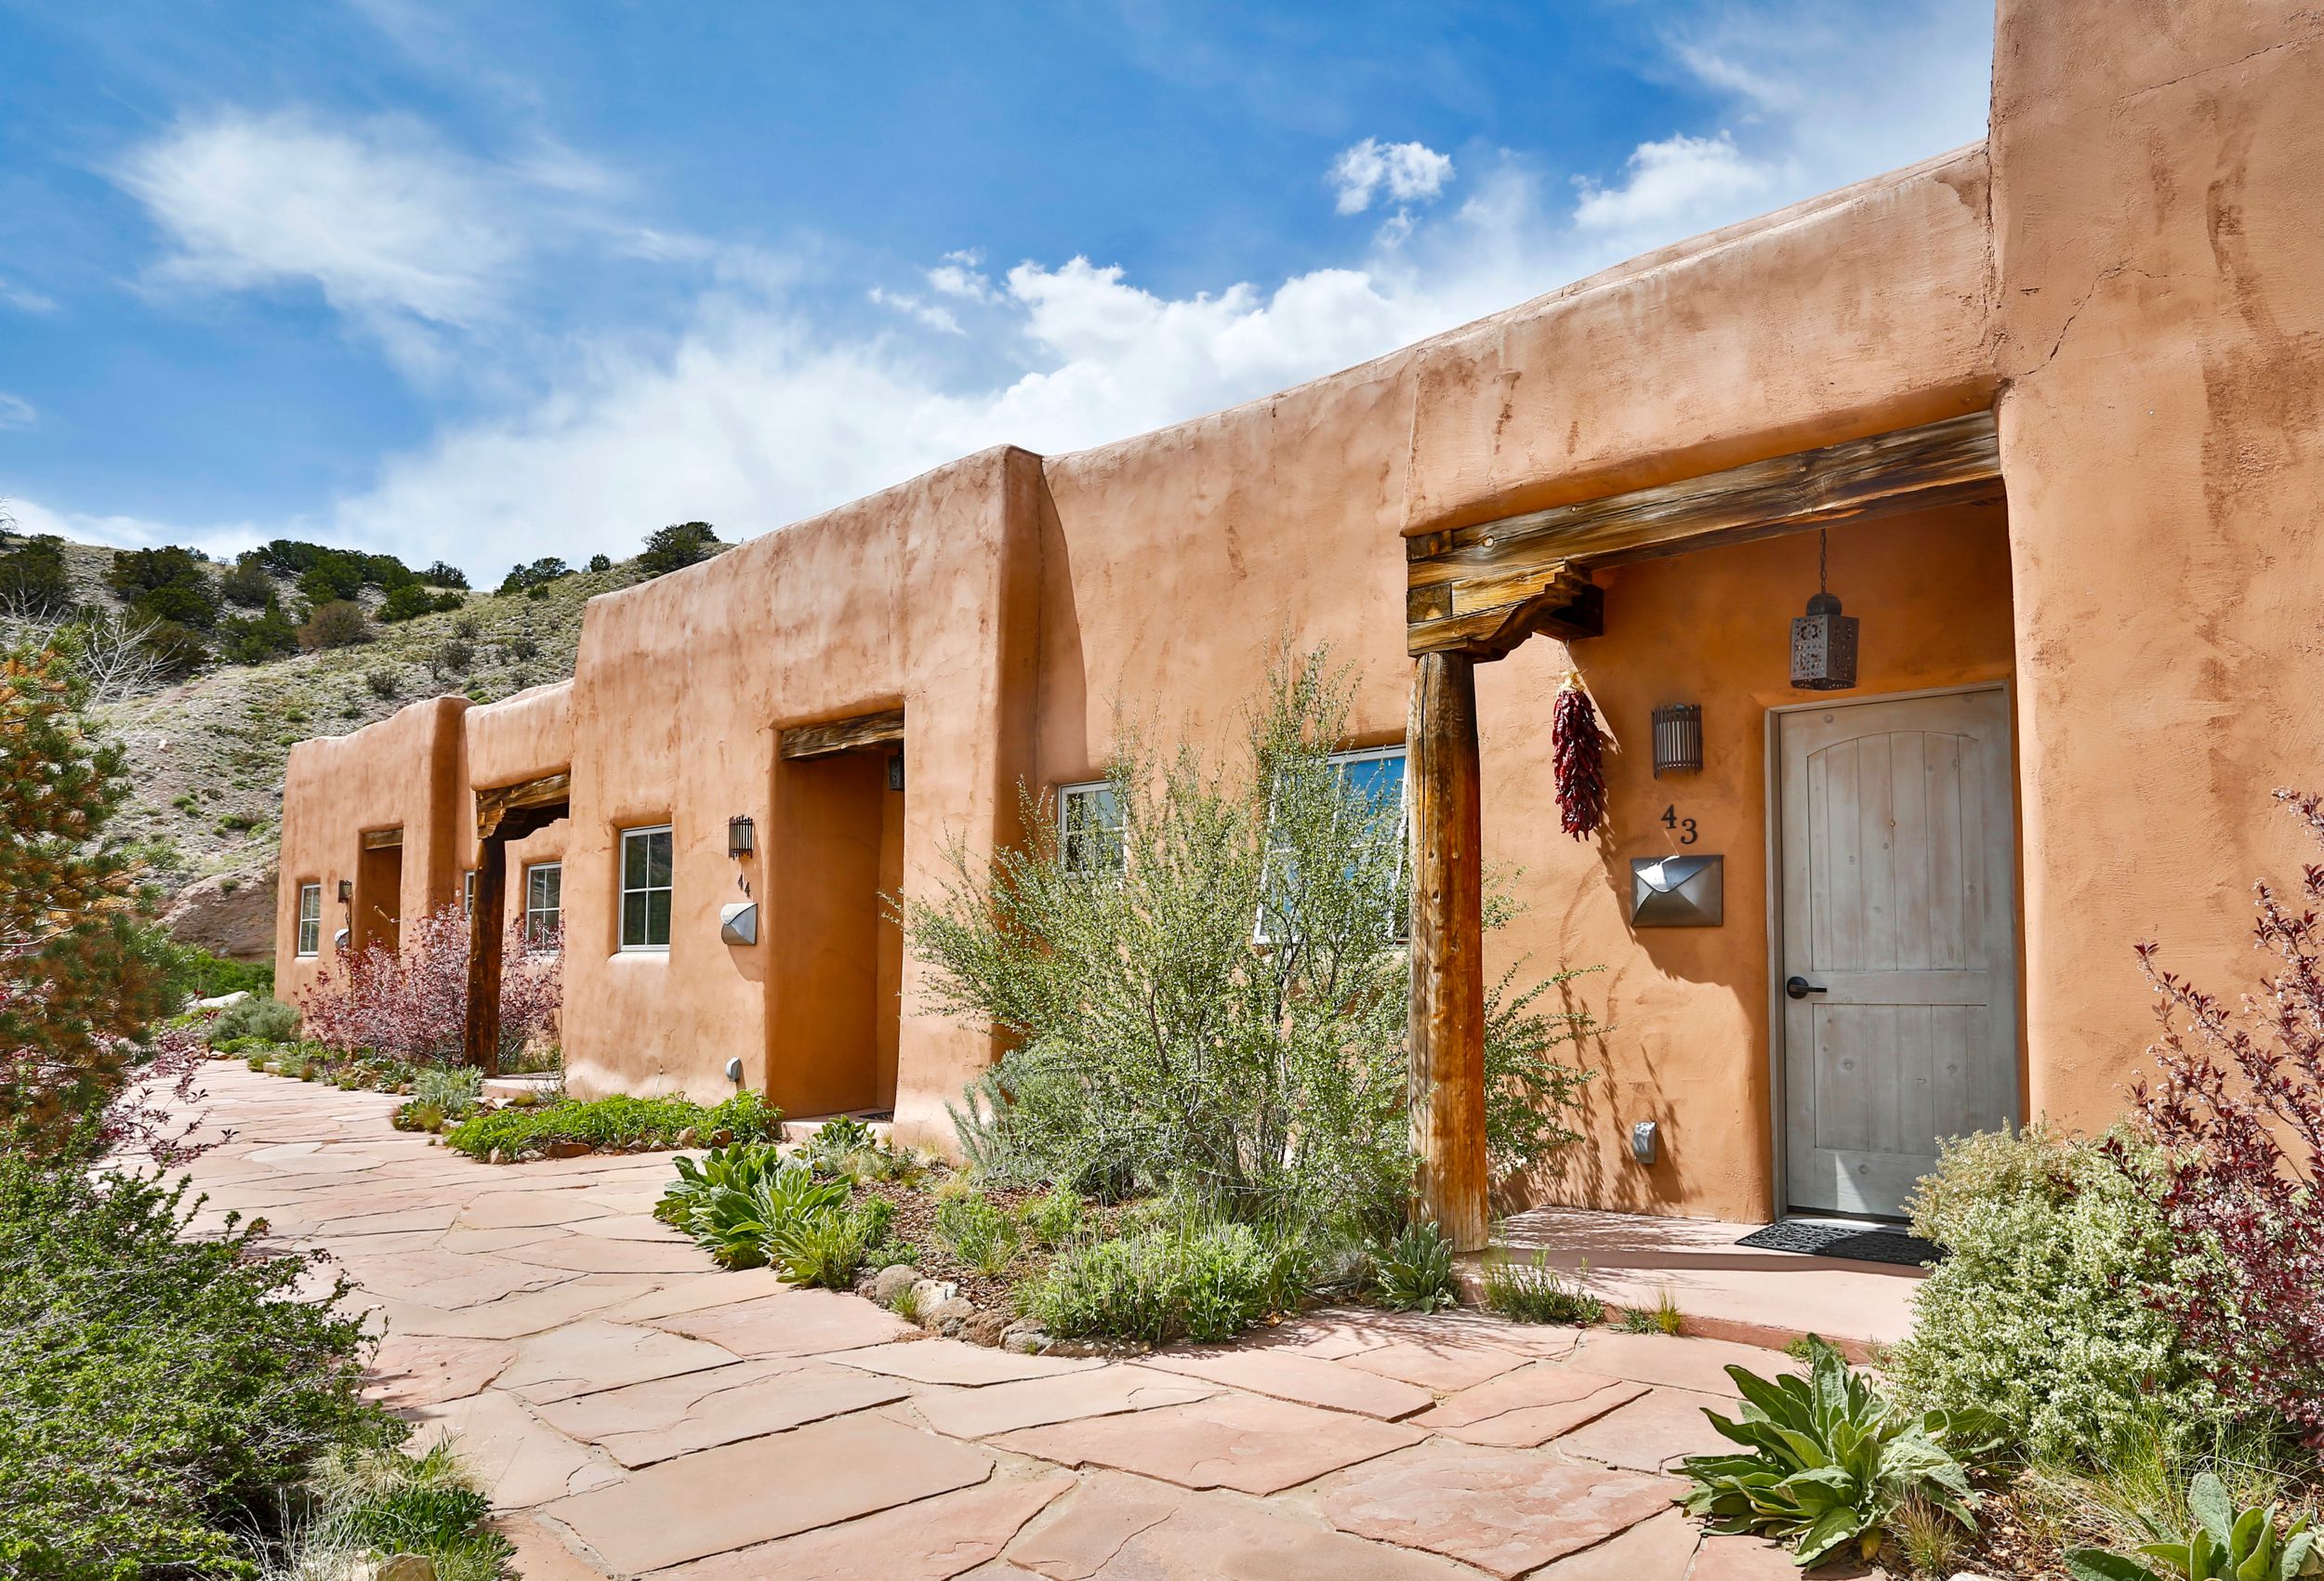 Romantic Getaway at Ojo Caliente Mineral Springs | New Mexico